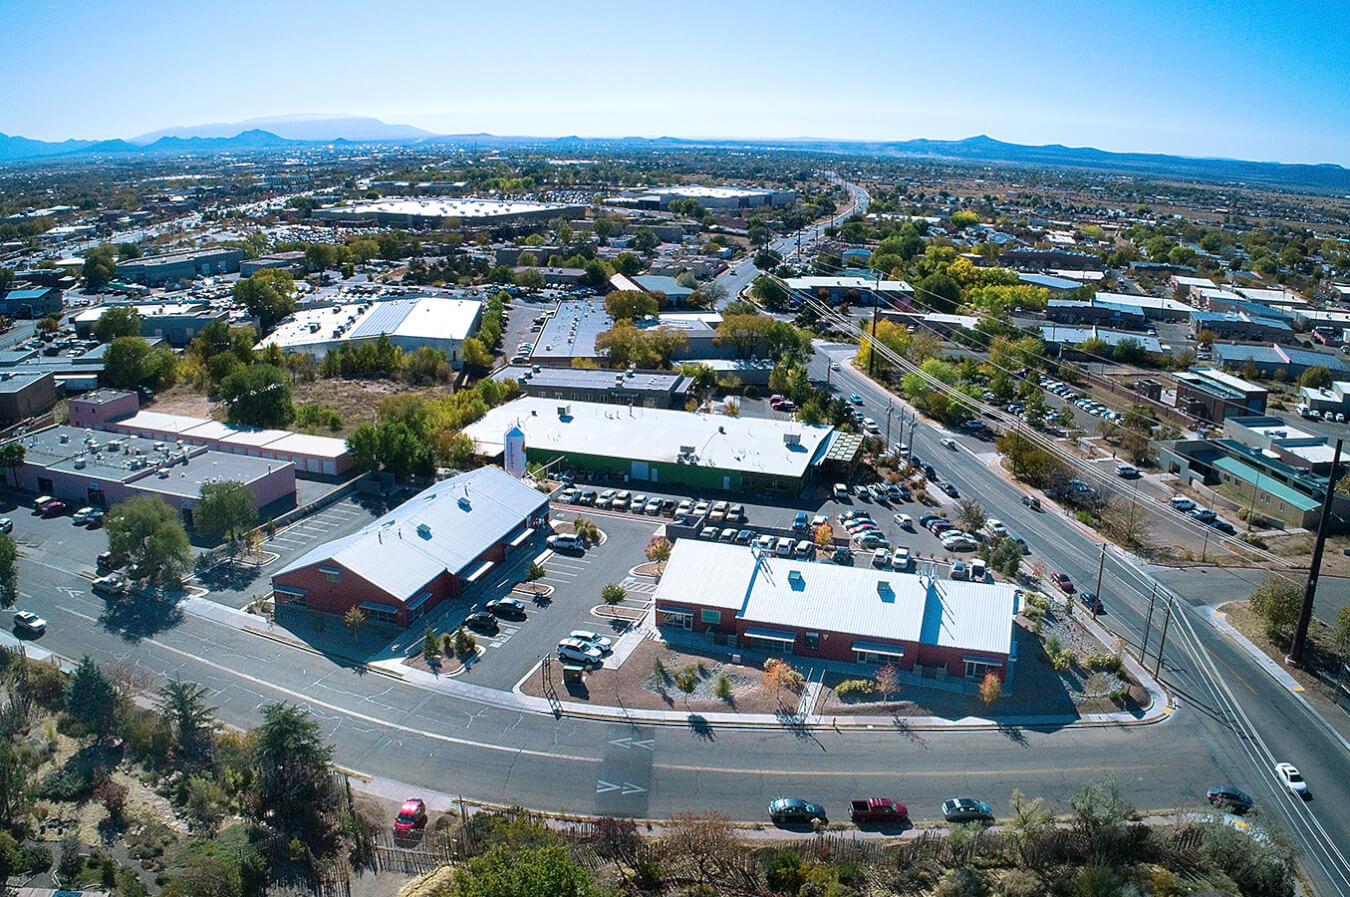 Aerial View of Santa Fe, Arizona town with home builders and contractors.